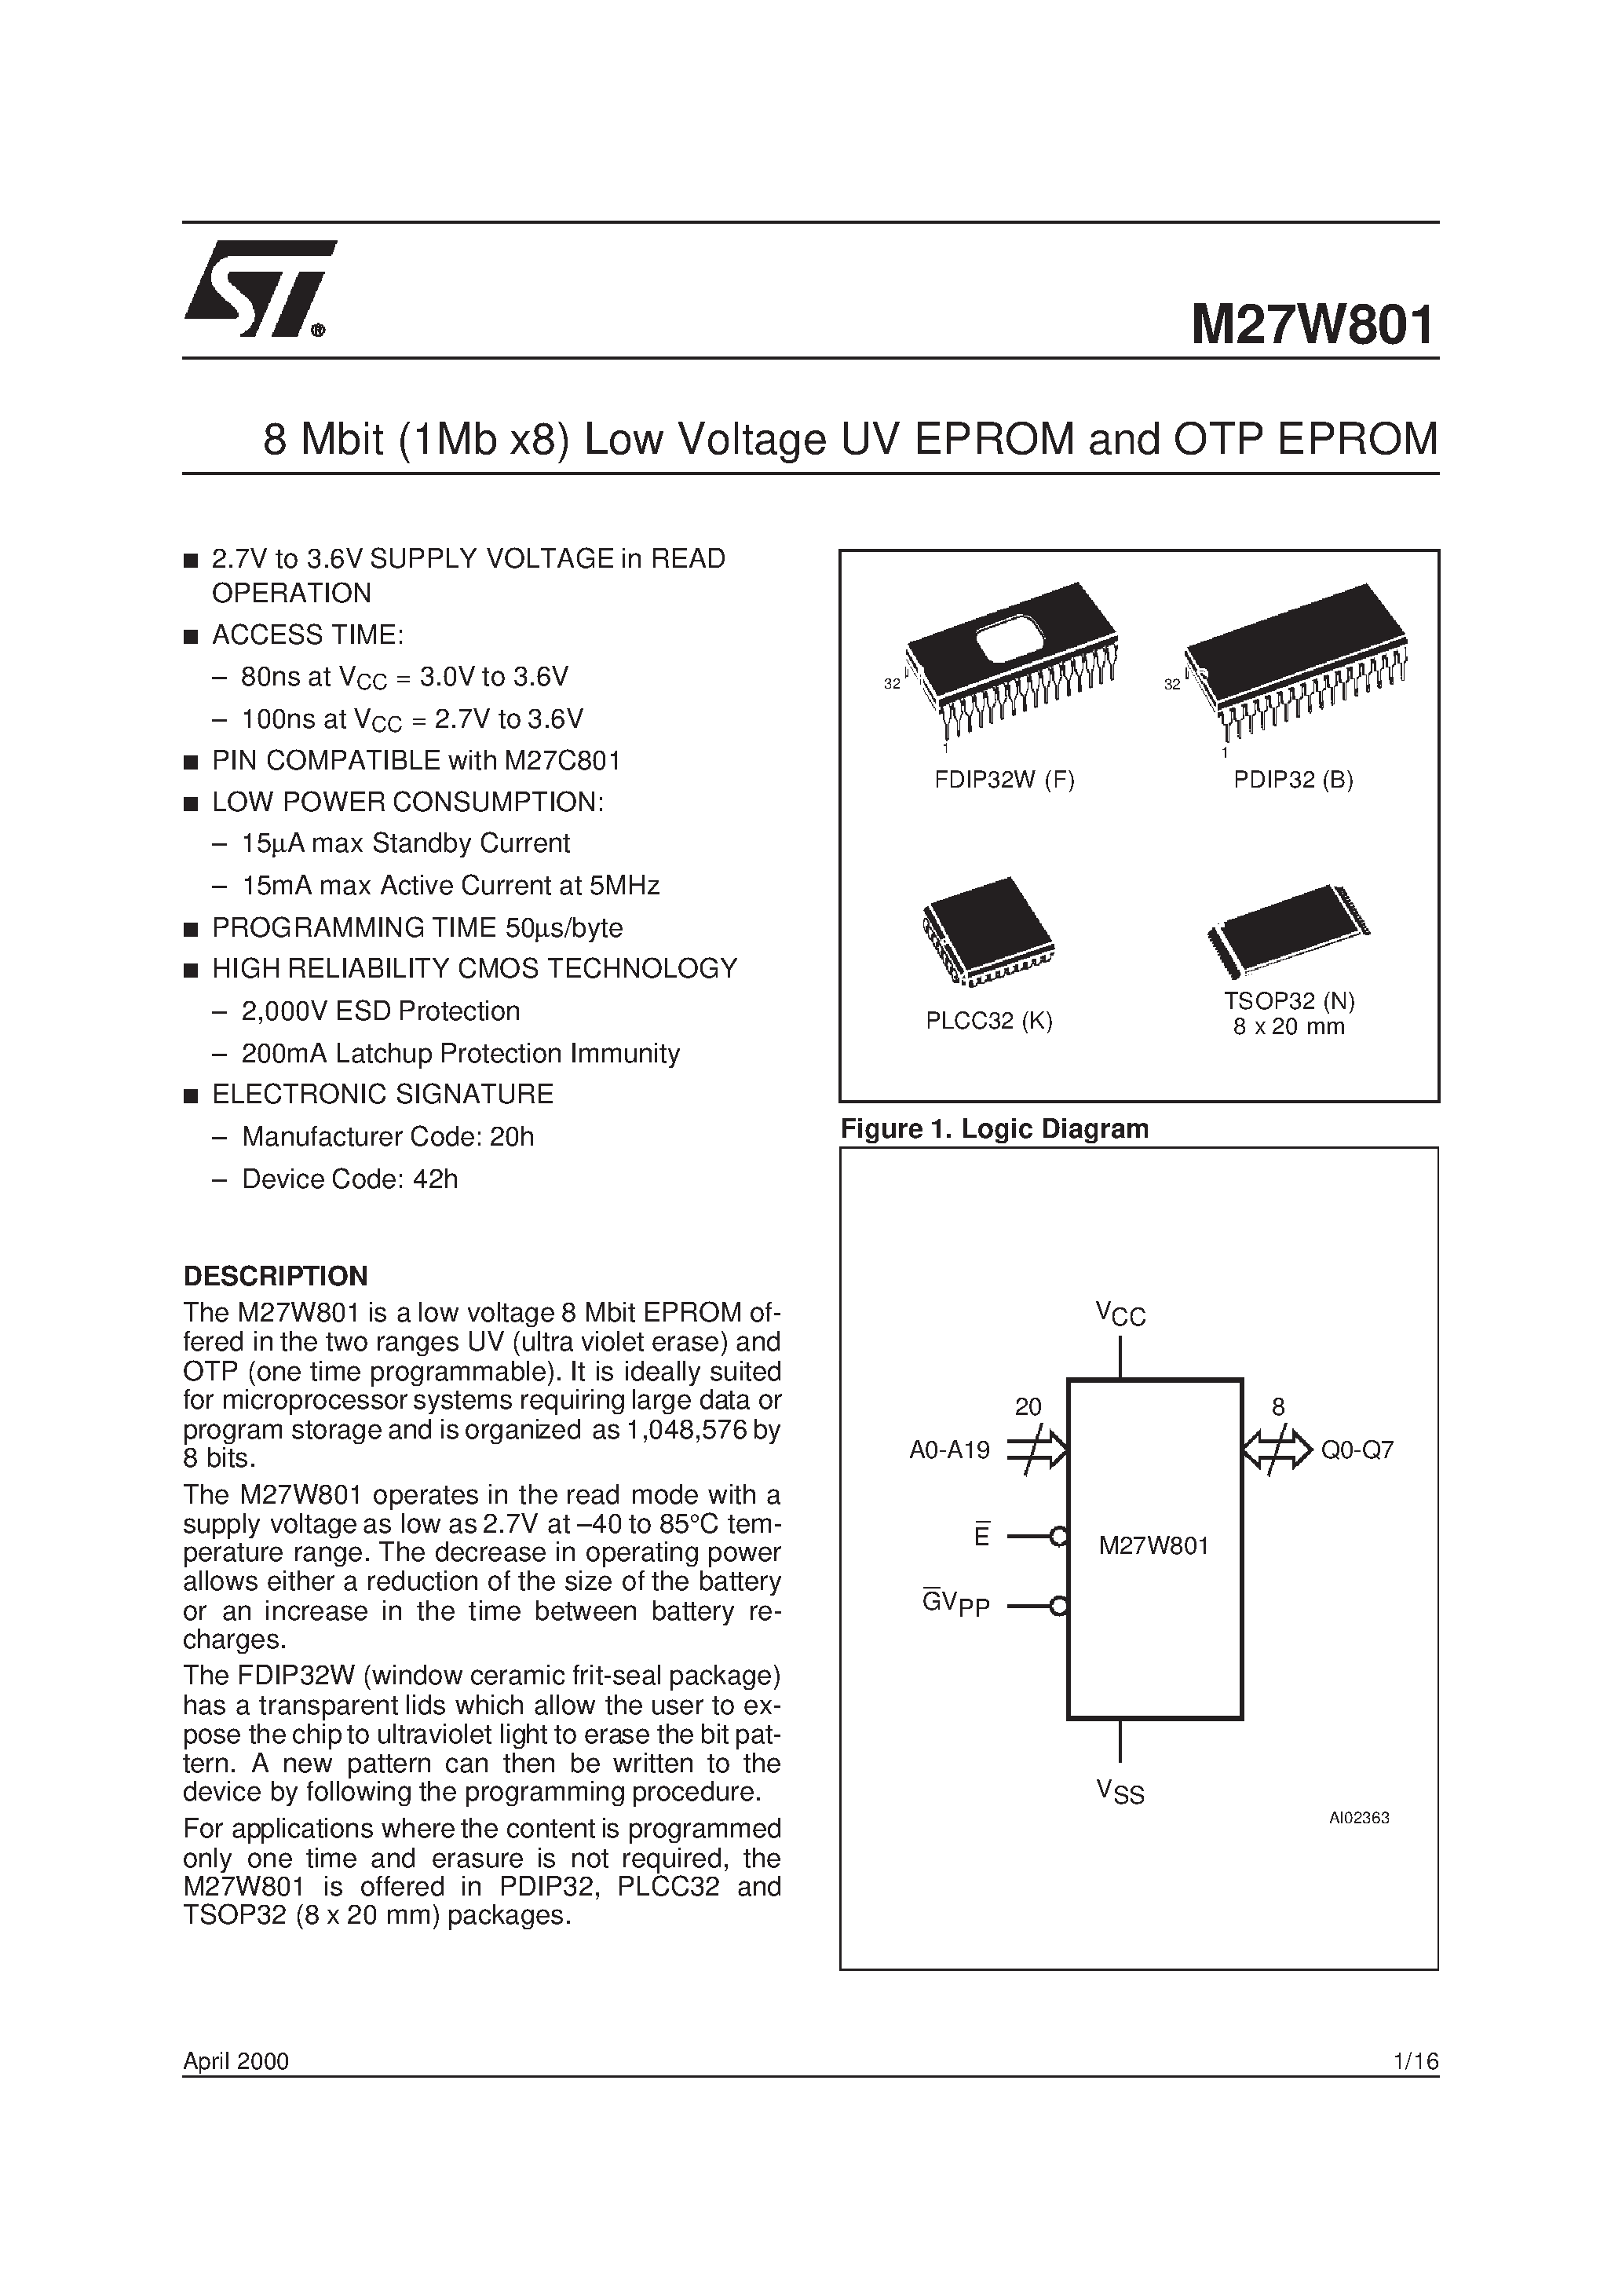 Datasheet M27W801-200F6TR - 8 Mbit 1Mb x8 Low Voltage UV EPROM and OTP EPROM page 1